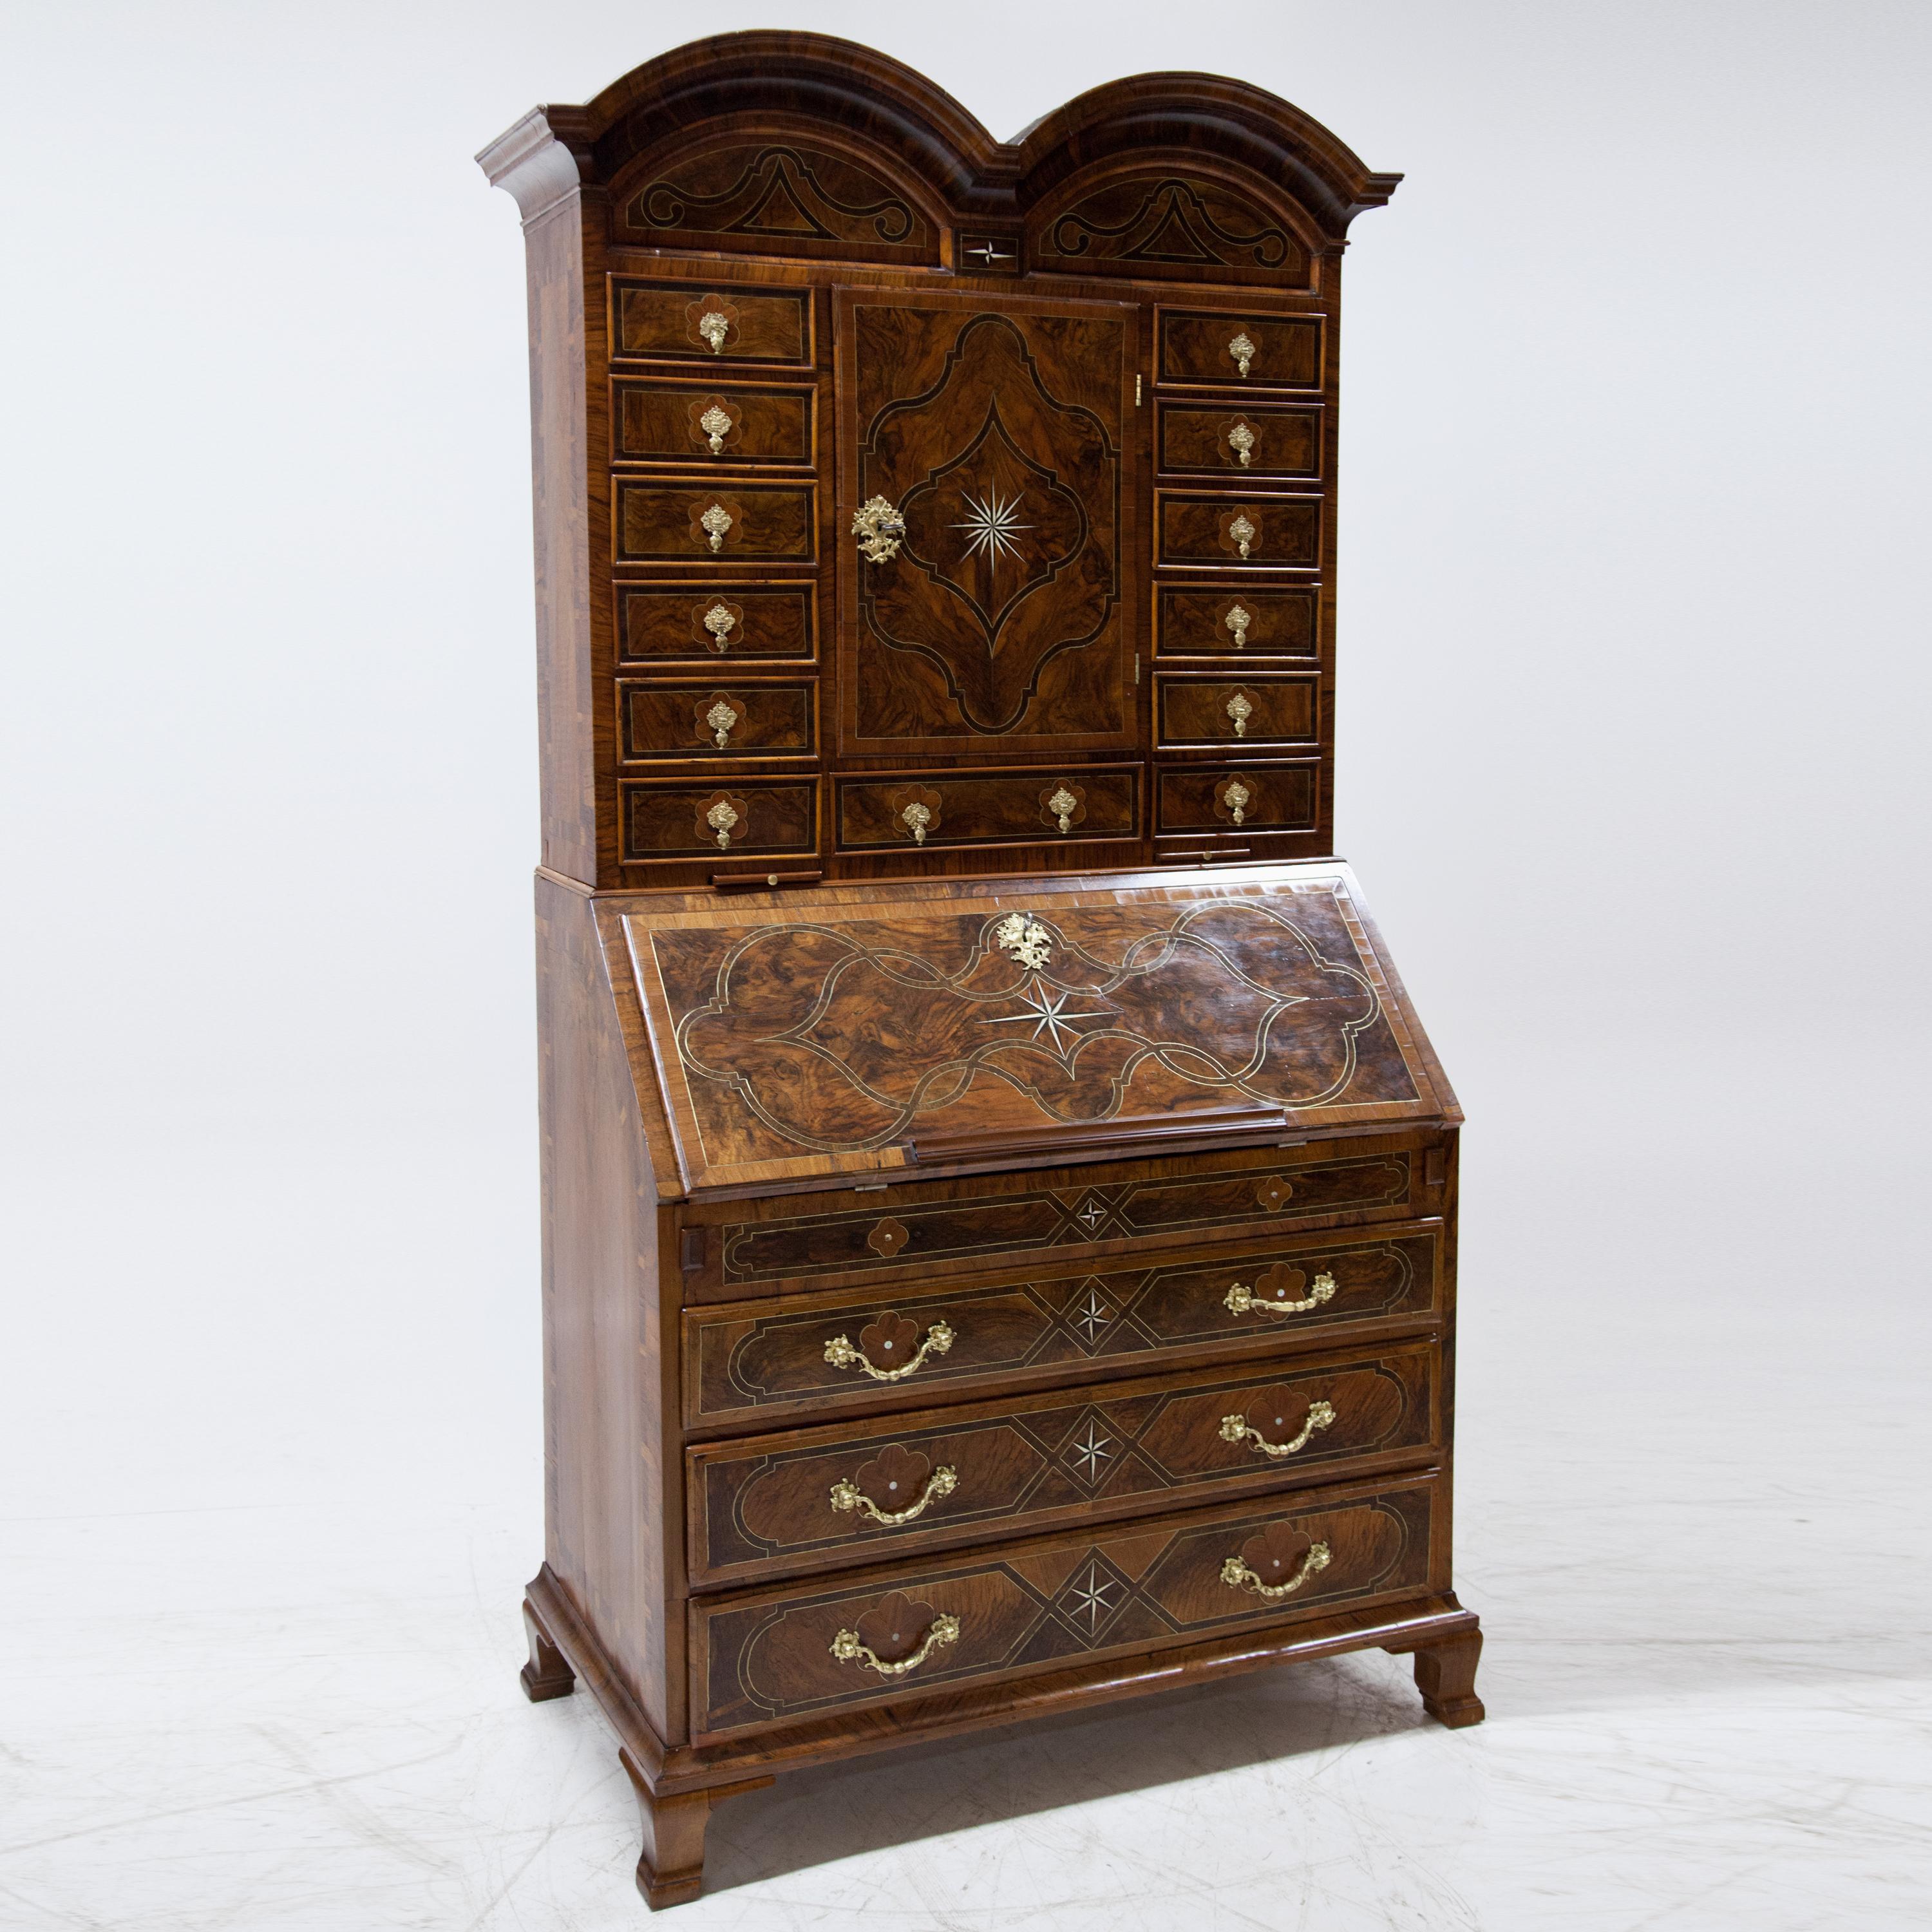 German Baroque Secretaire, Probably Saxony First Half of the 18th Century